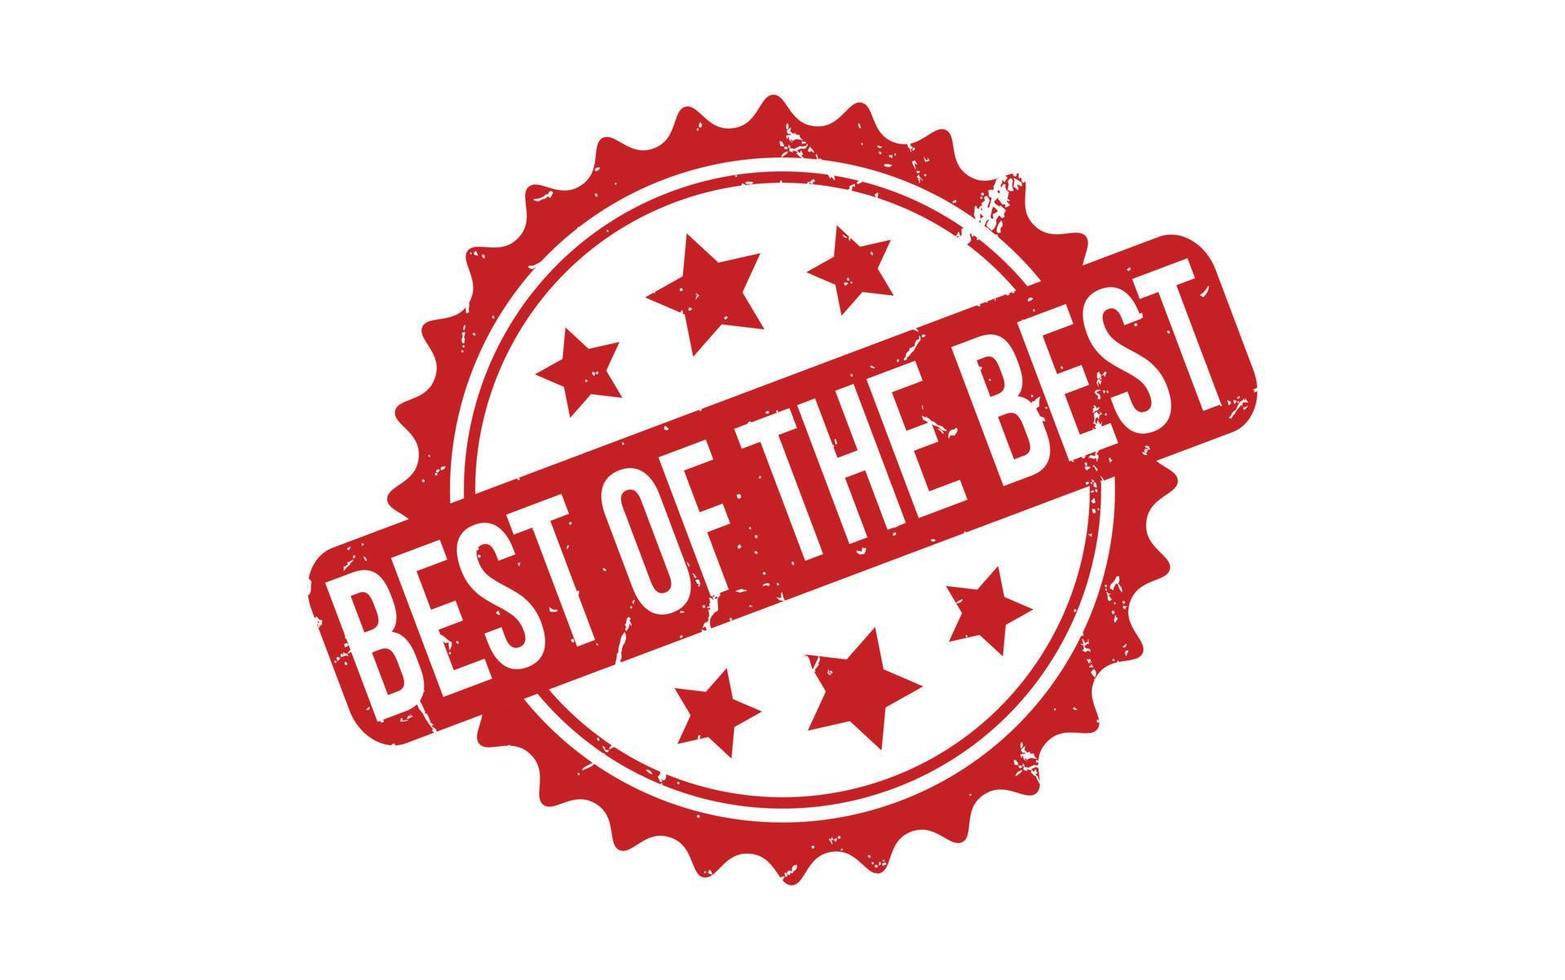 Best of The Best Rubber Stamp Seal Vector